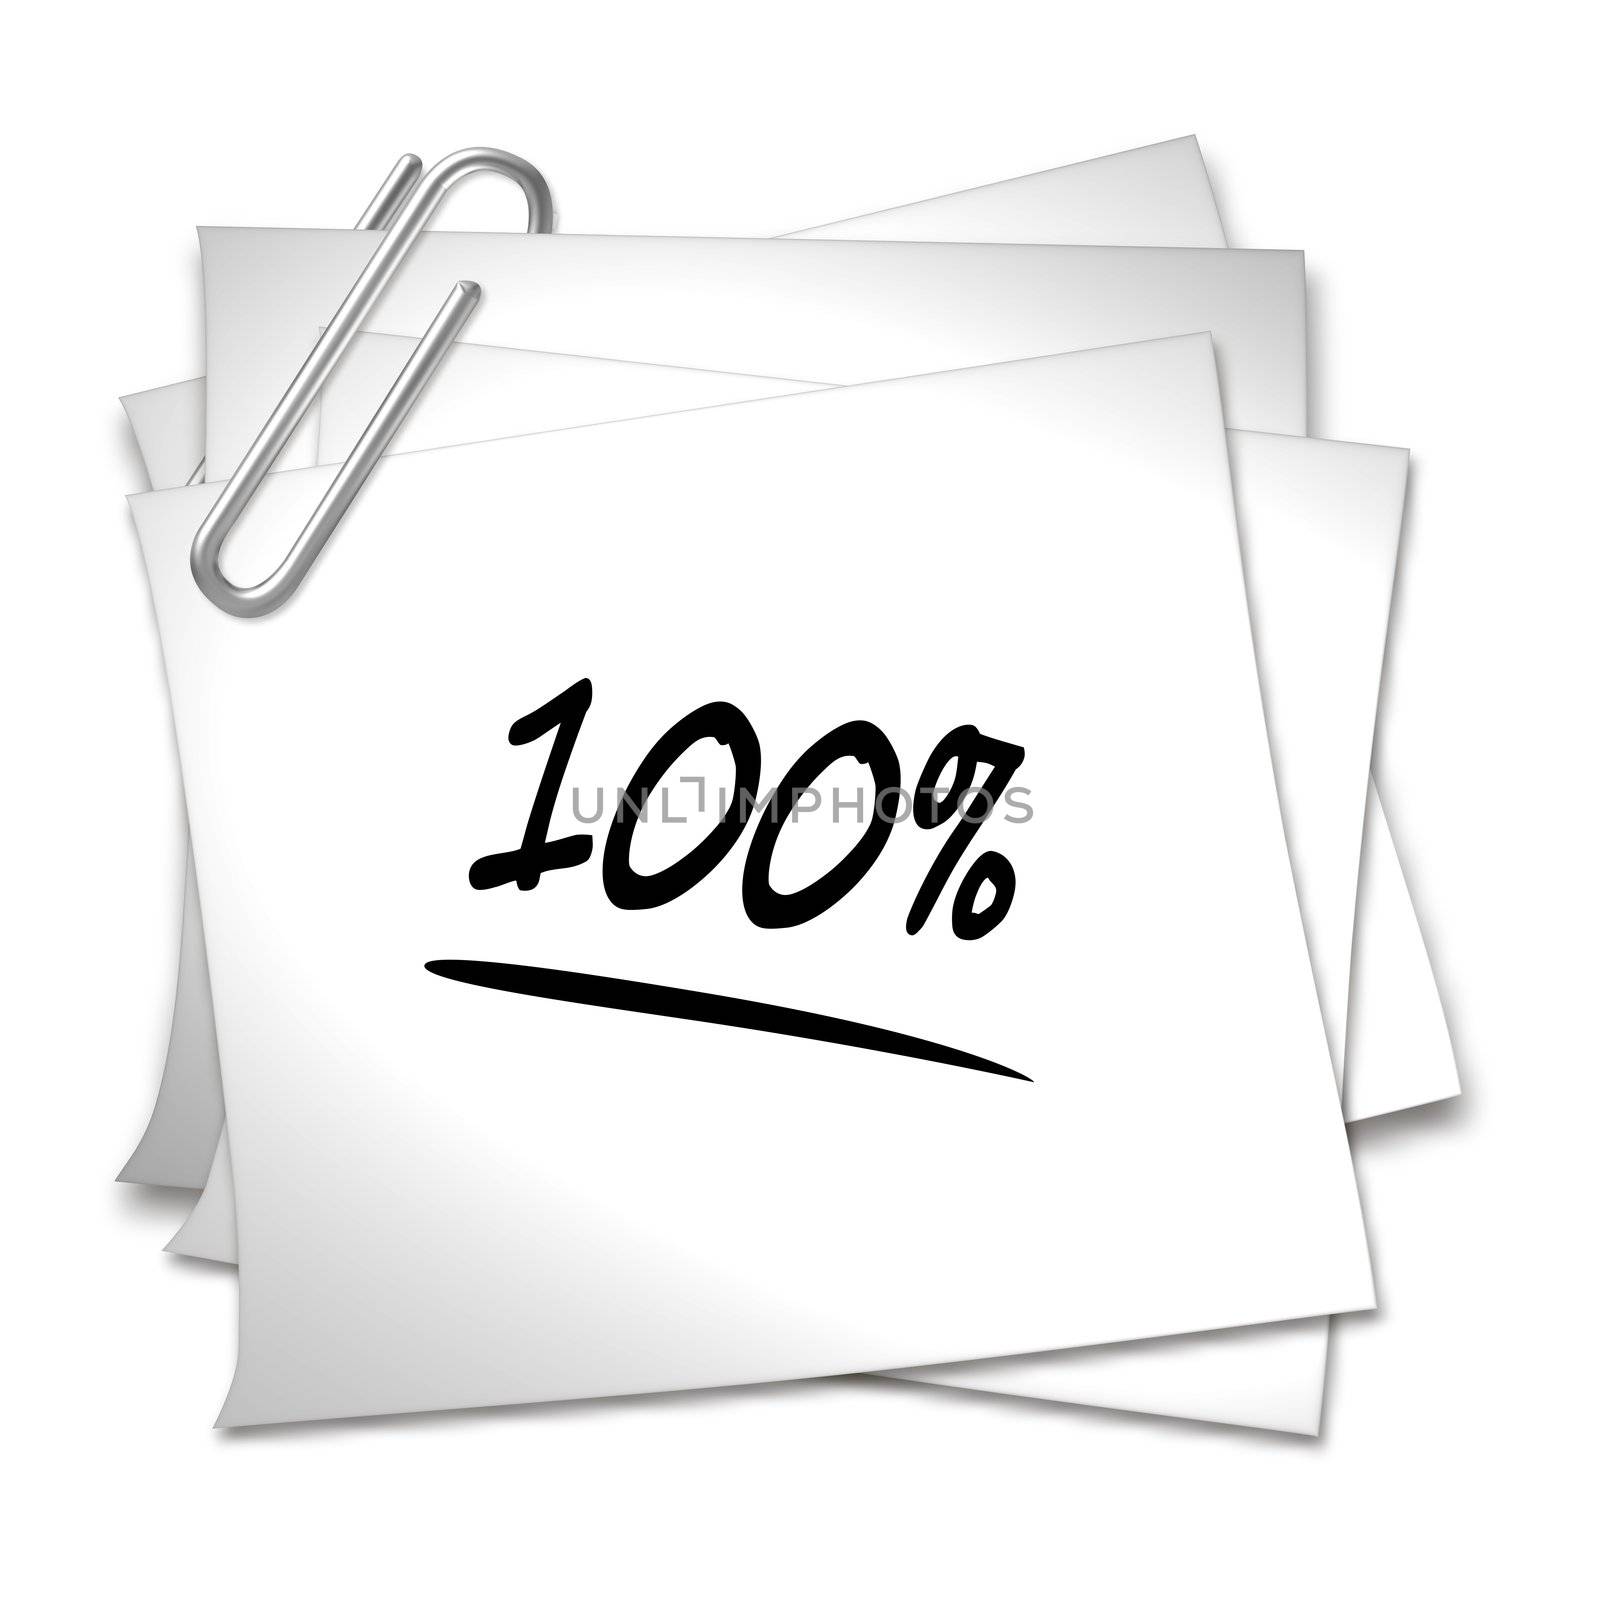 Memo with Paper Clip - 100 % by peromarketing